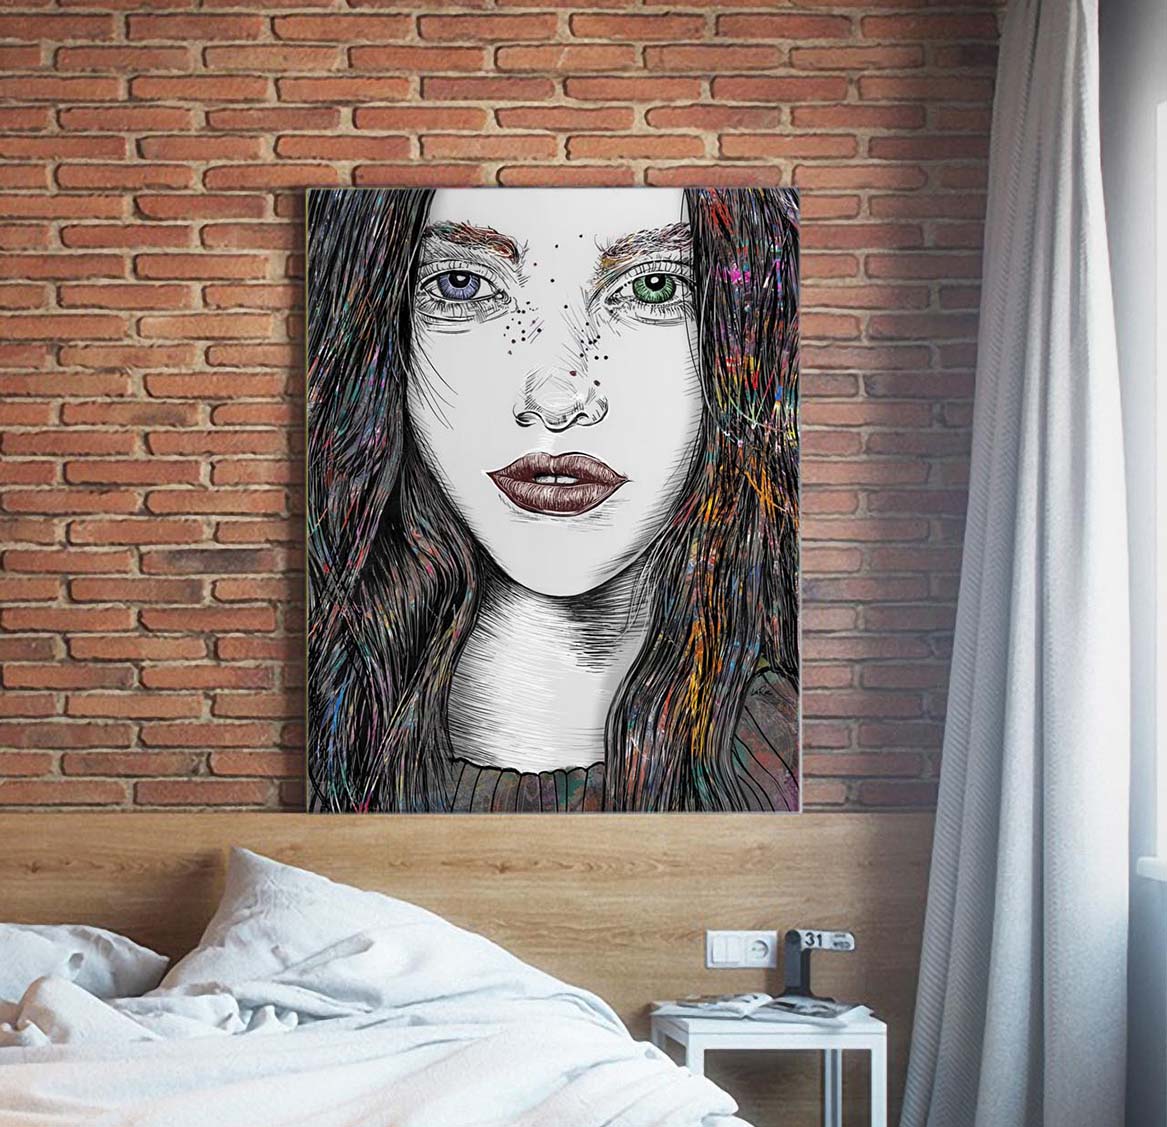 Tara mixed media portrait by Doug LaRue on a red brick wall in a bedroom